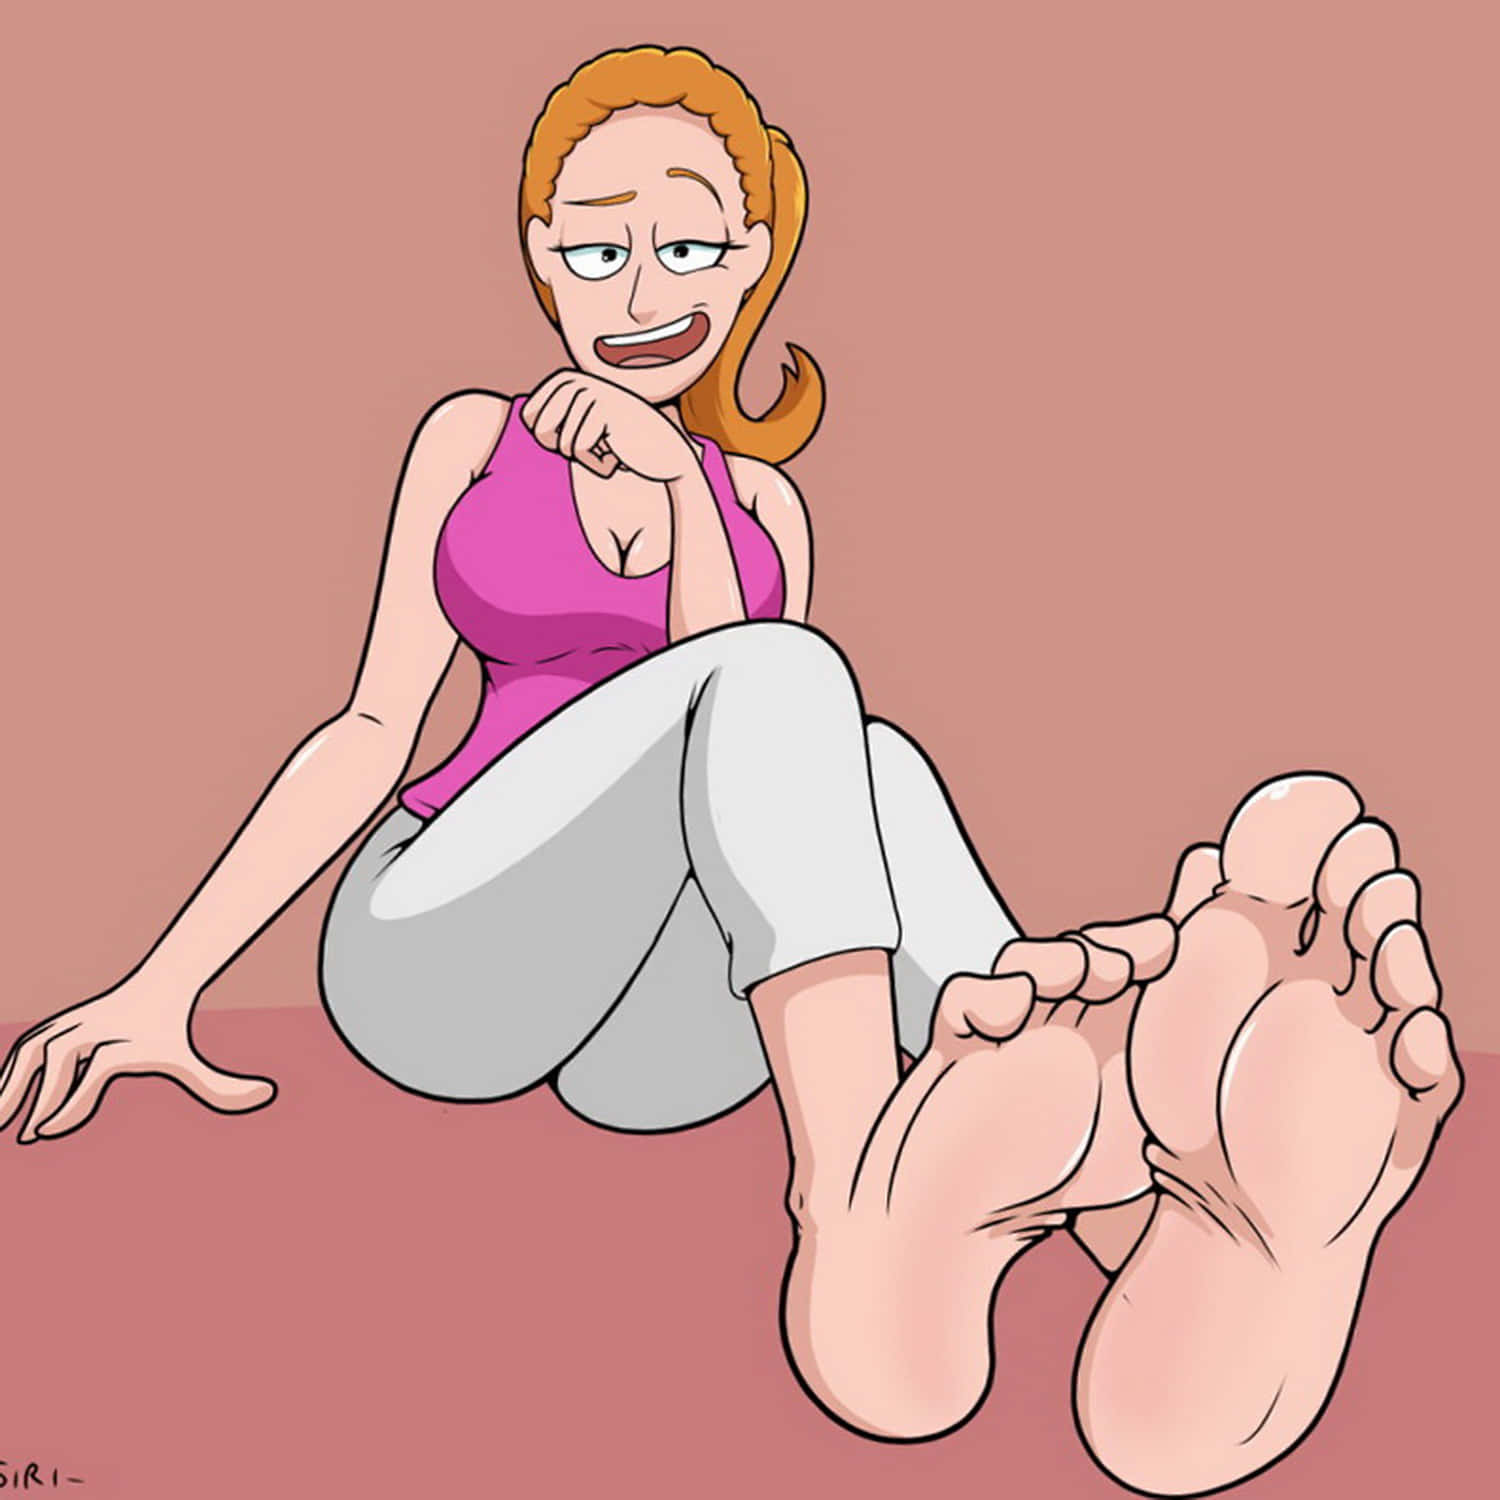 Solo Foot Fetish - Summer Smith Feet Tits Foot Fetish Solo < Your Cartoon Porn